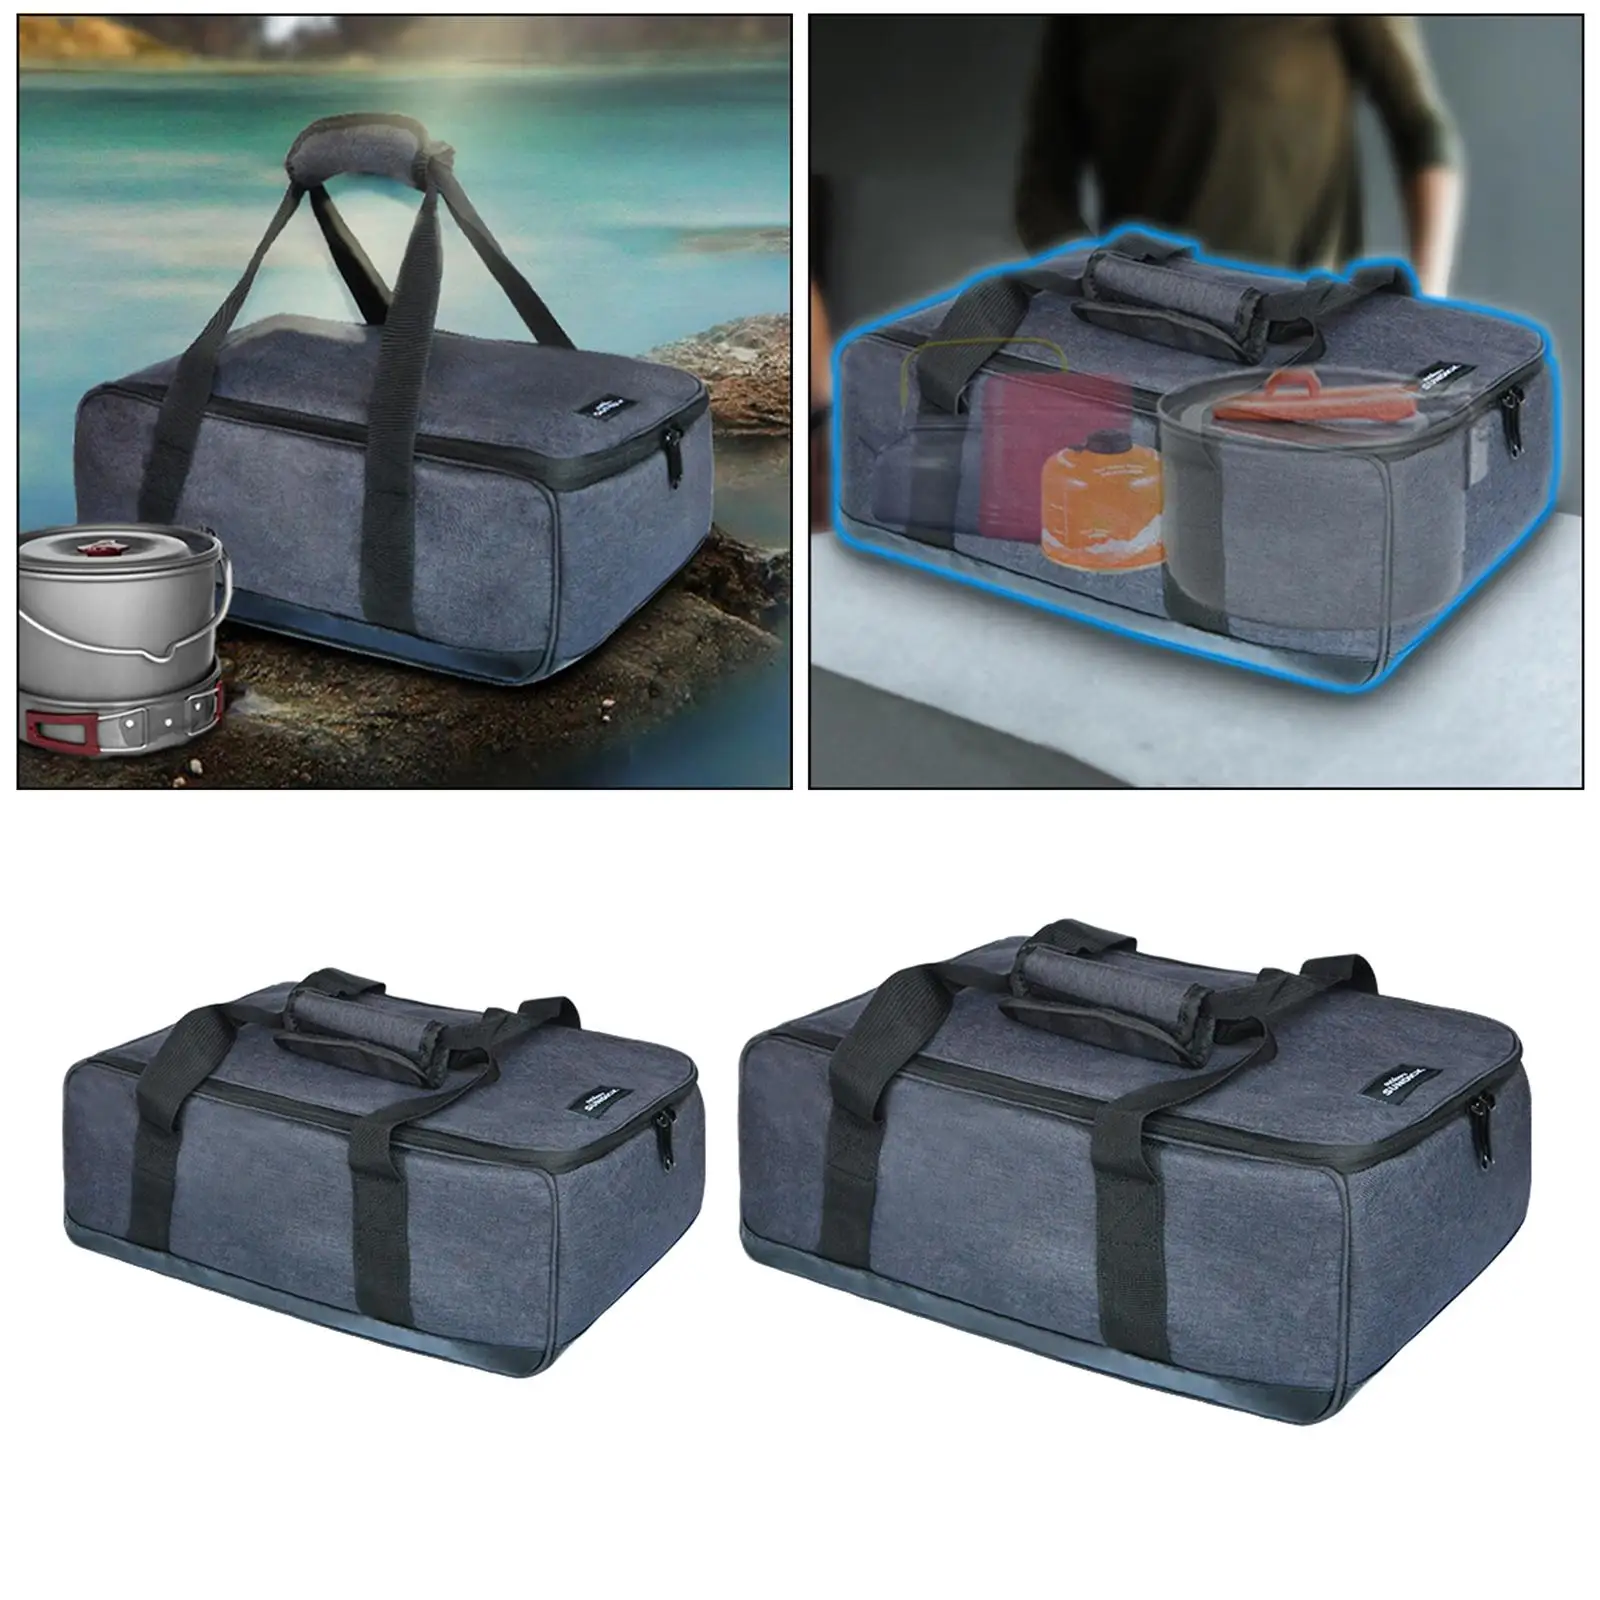 Cookware Kits Carry Bag Handbag Safety Tote Carrier BBQ Storage